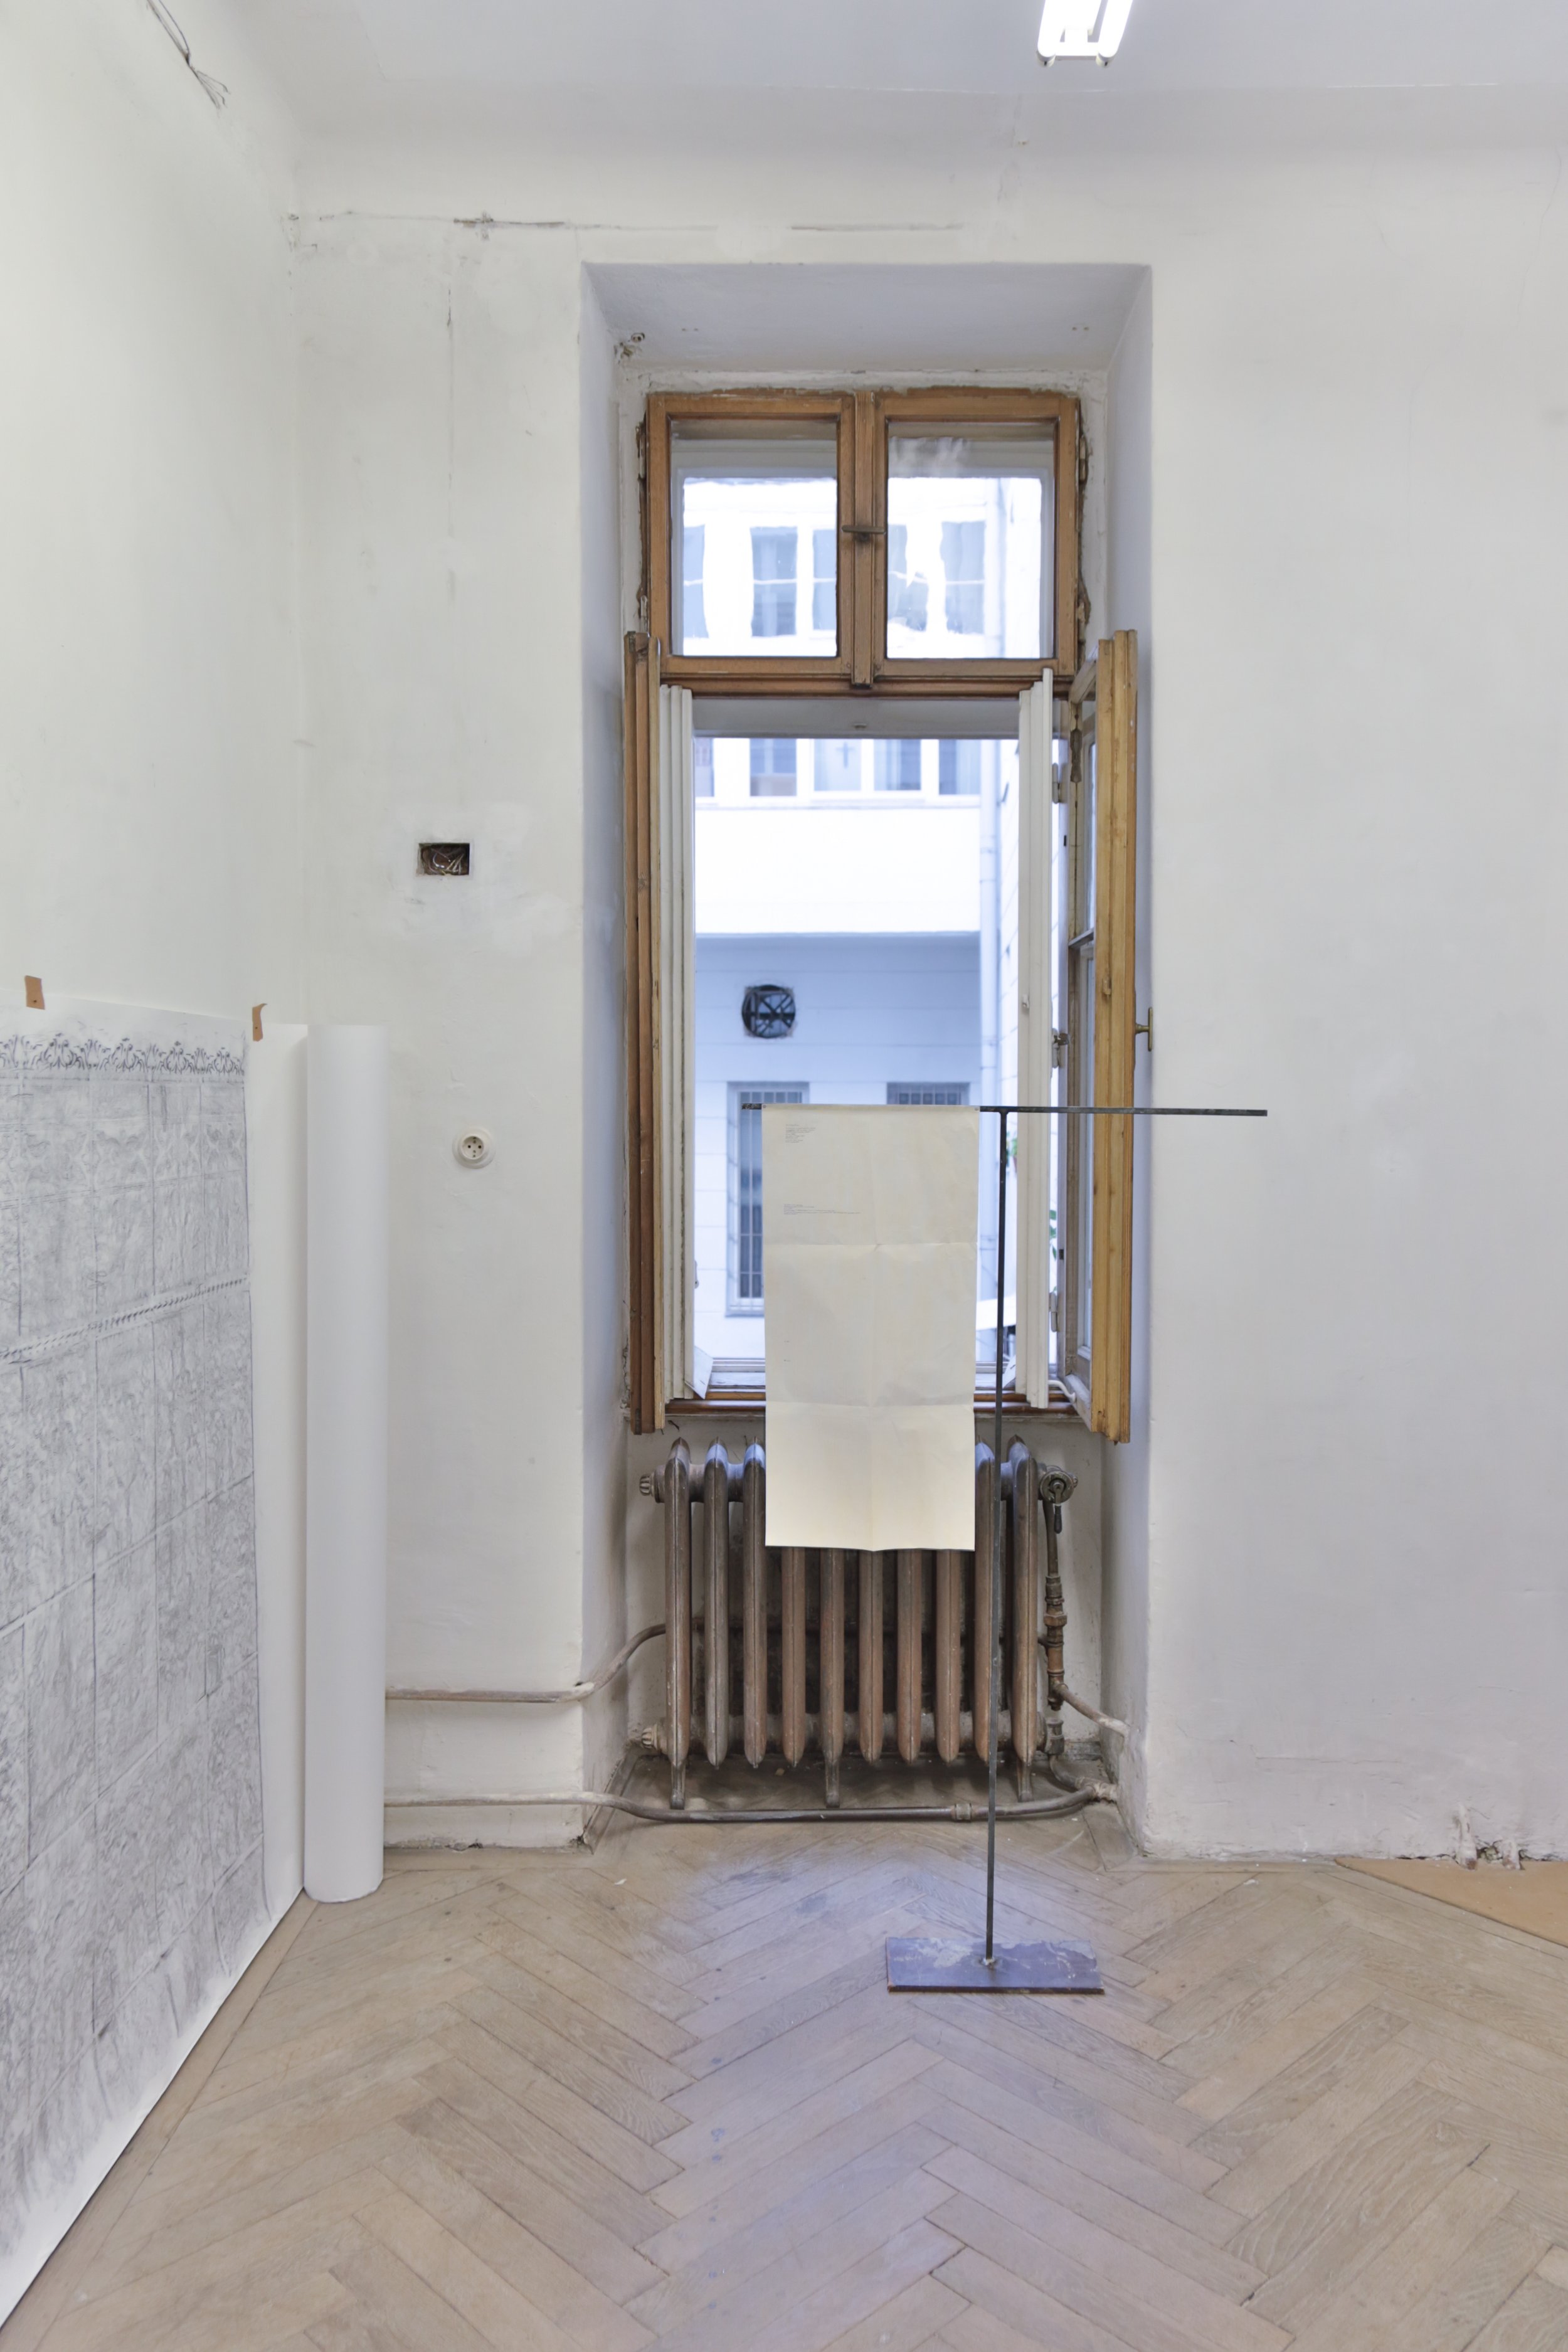   fig15 installation view (left to right)   Winona  (Brussels),    Graphite rubbing of Winona, Rue Van Meyel 49, 1080 Brussels    Switch-Hook  (Chicago),    S-H, Could Vienna hear a whisper in Chicago, witness a light flicker?  